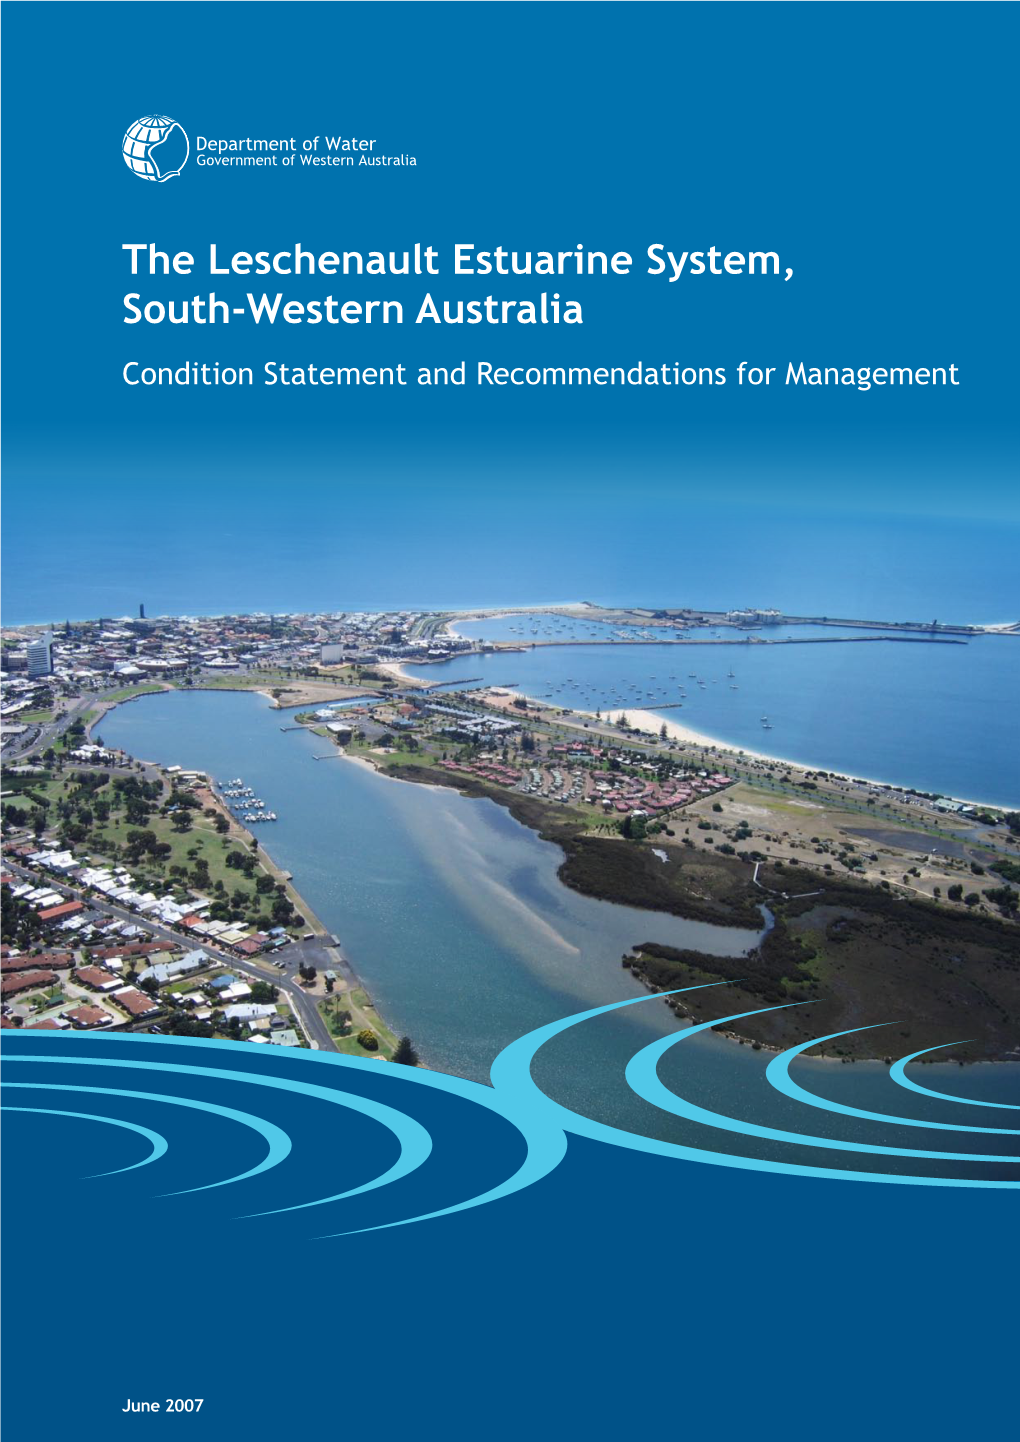 The Leschenault Estuarine System, South-Western Australia Condition Statement and Recommendations for Management